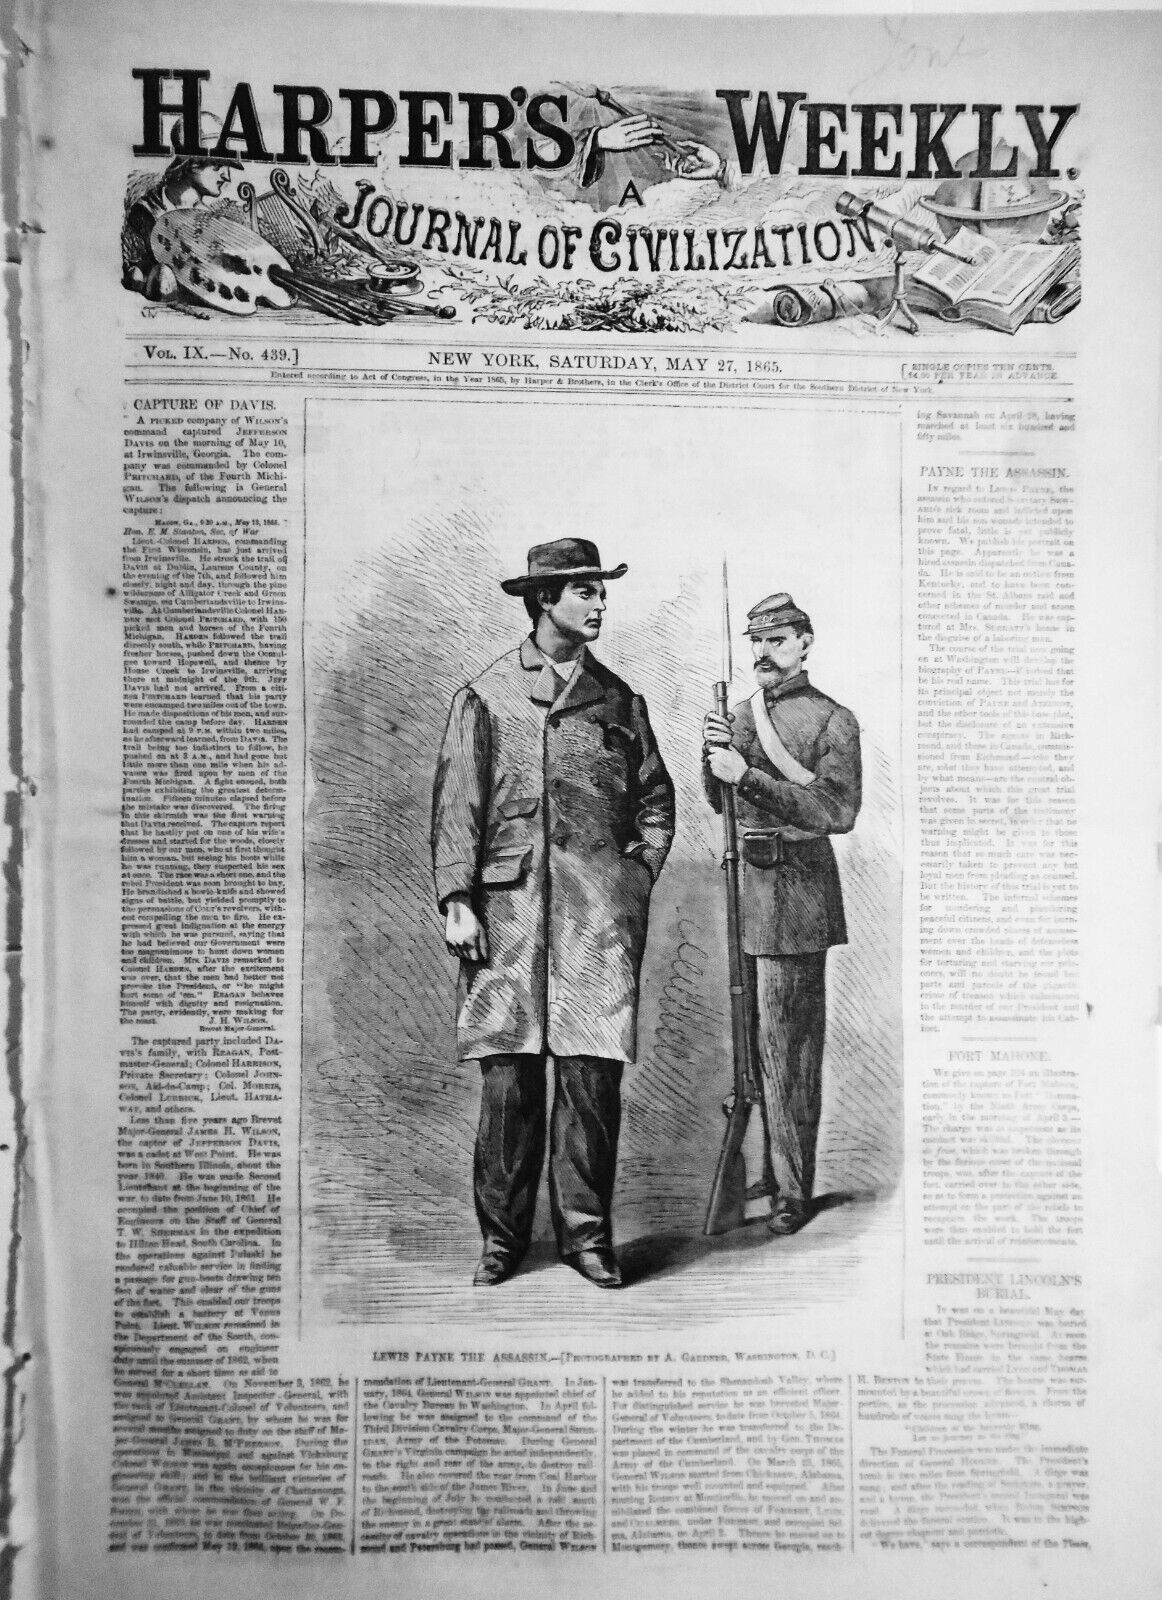 Harper's Weekly May 27, 1865 Original issue: Lincoln's Burial and Procession etc